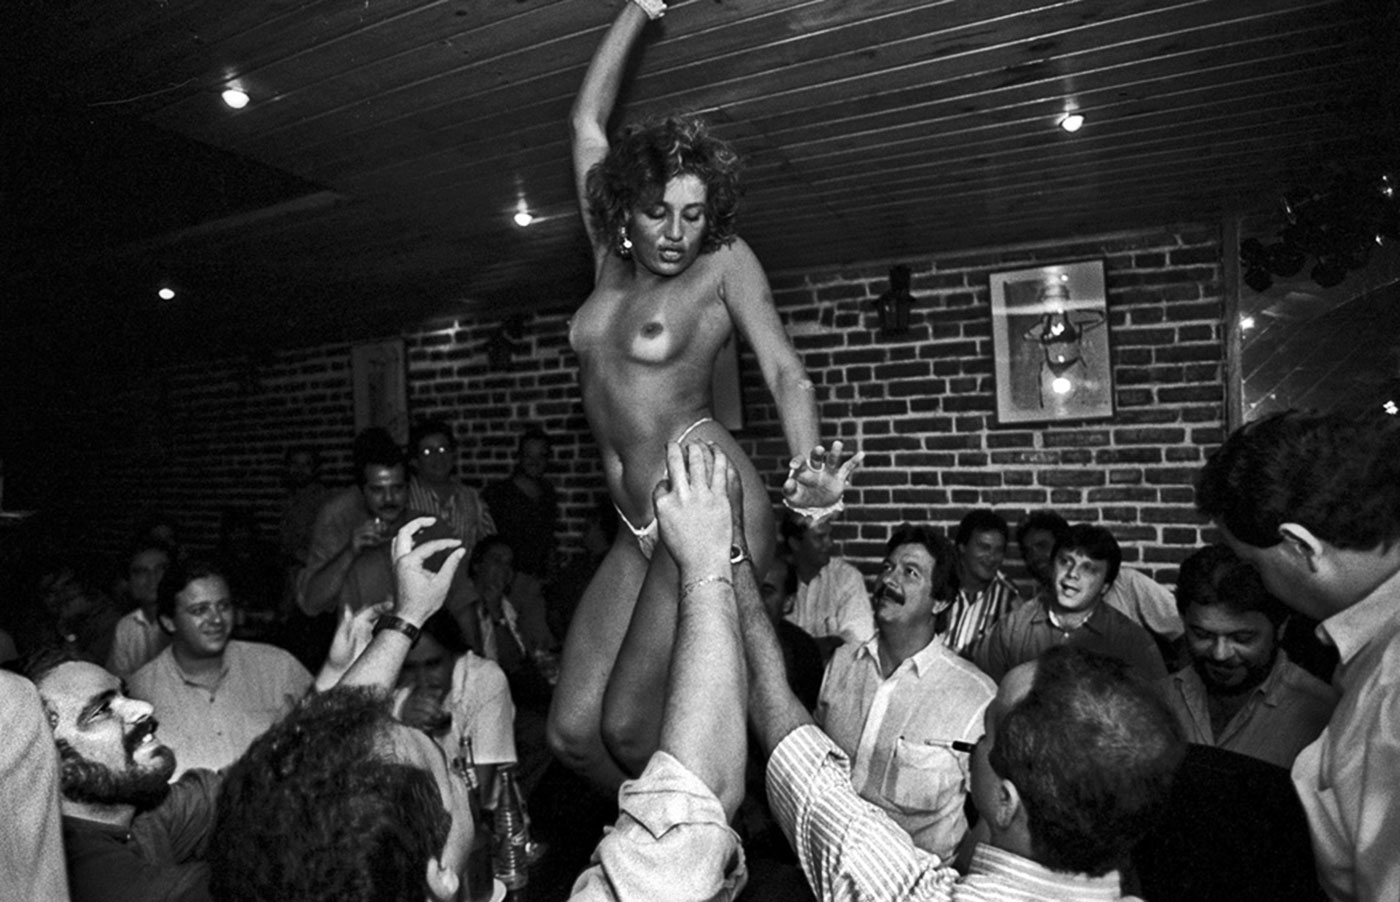 Luci performing at the Zona Franca Club  : FEATURE: The Girls of Recife : Viviane Moos |  Documentary Photographer